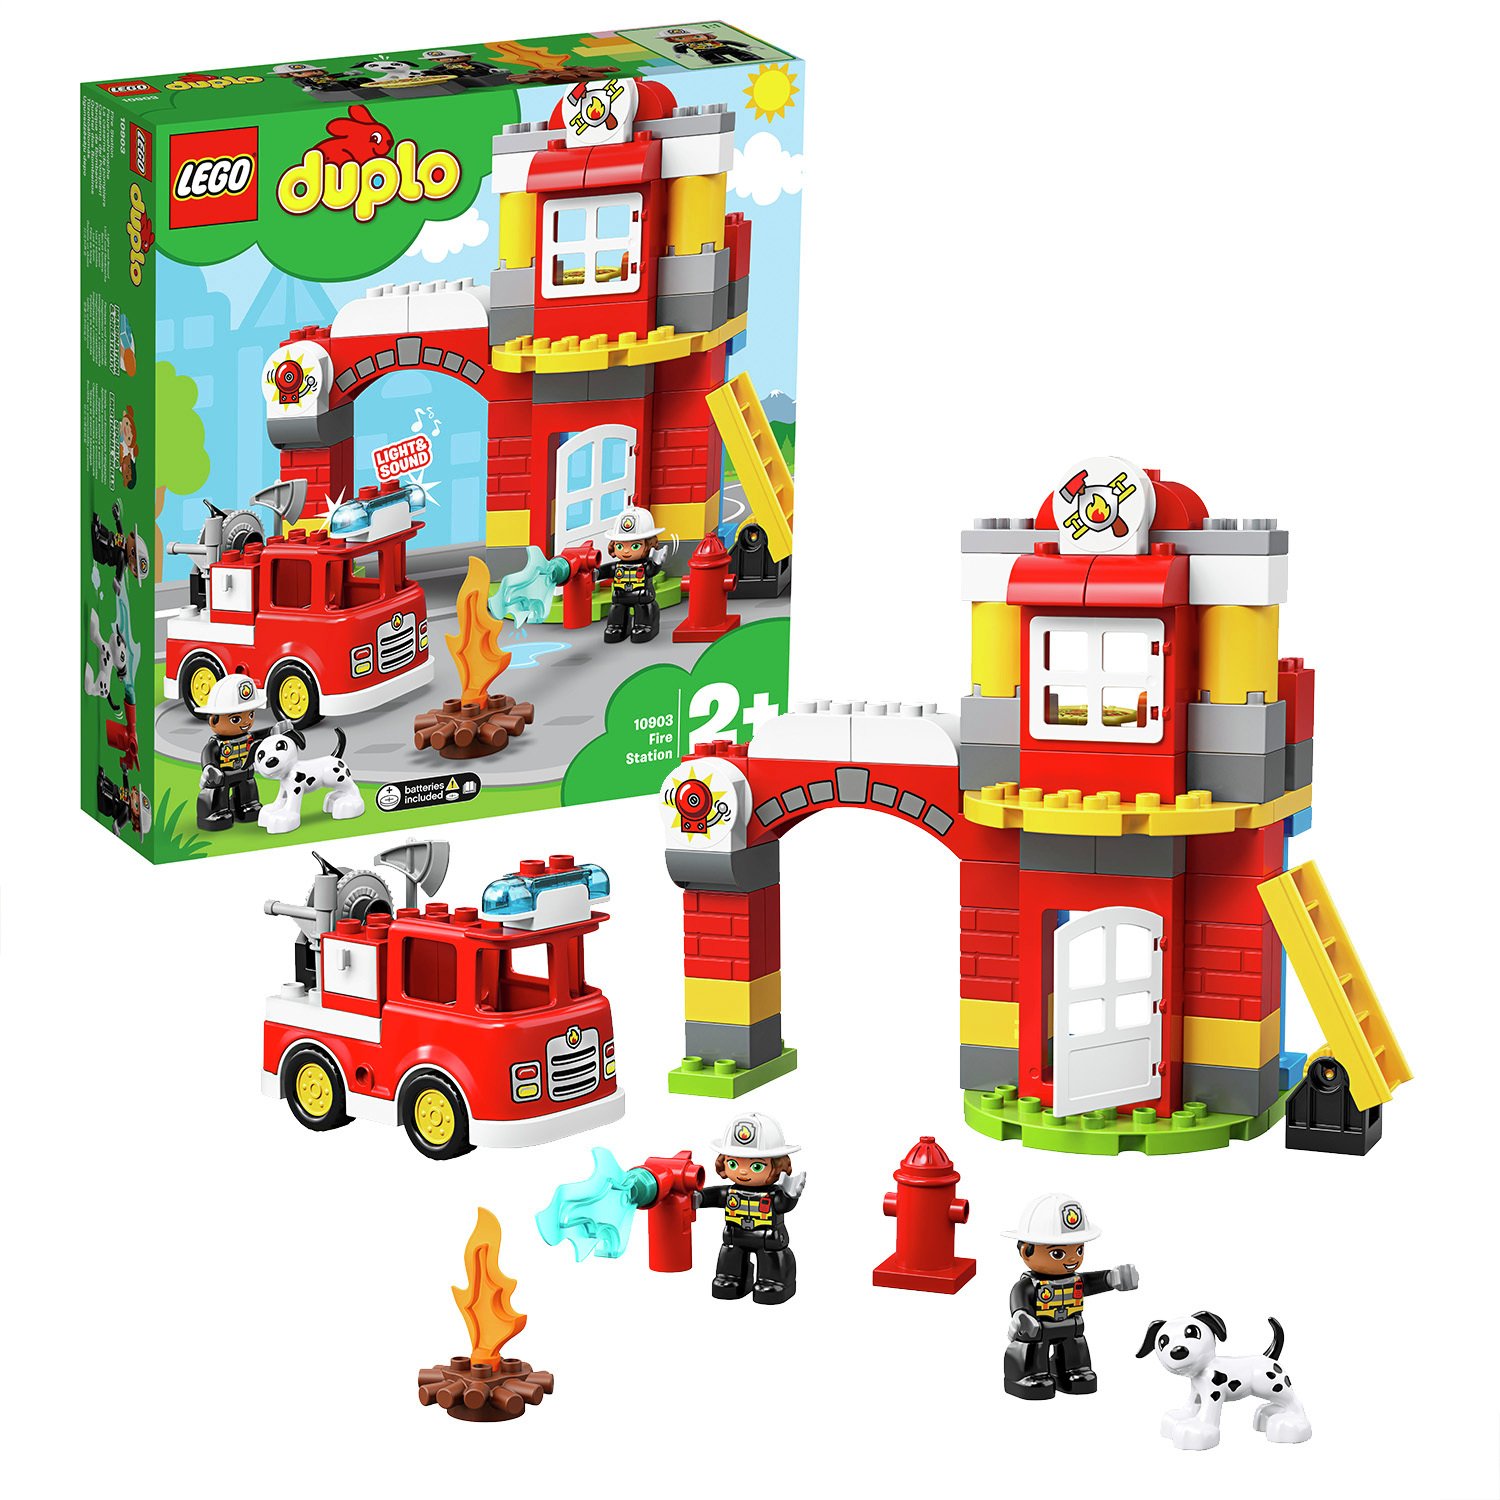 LEGO DUPLO Fire Station Playset - 10903